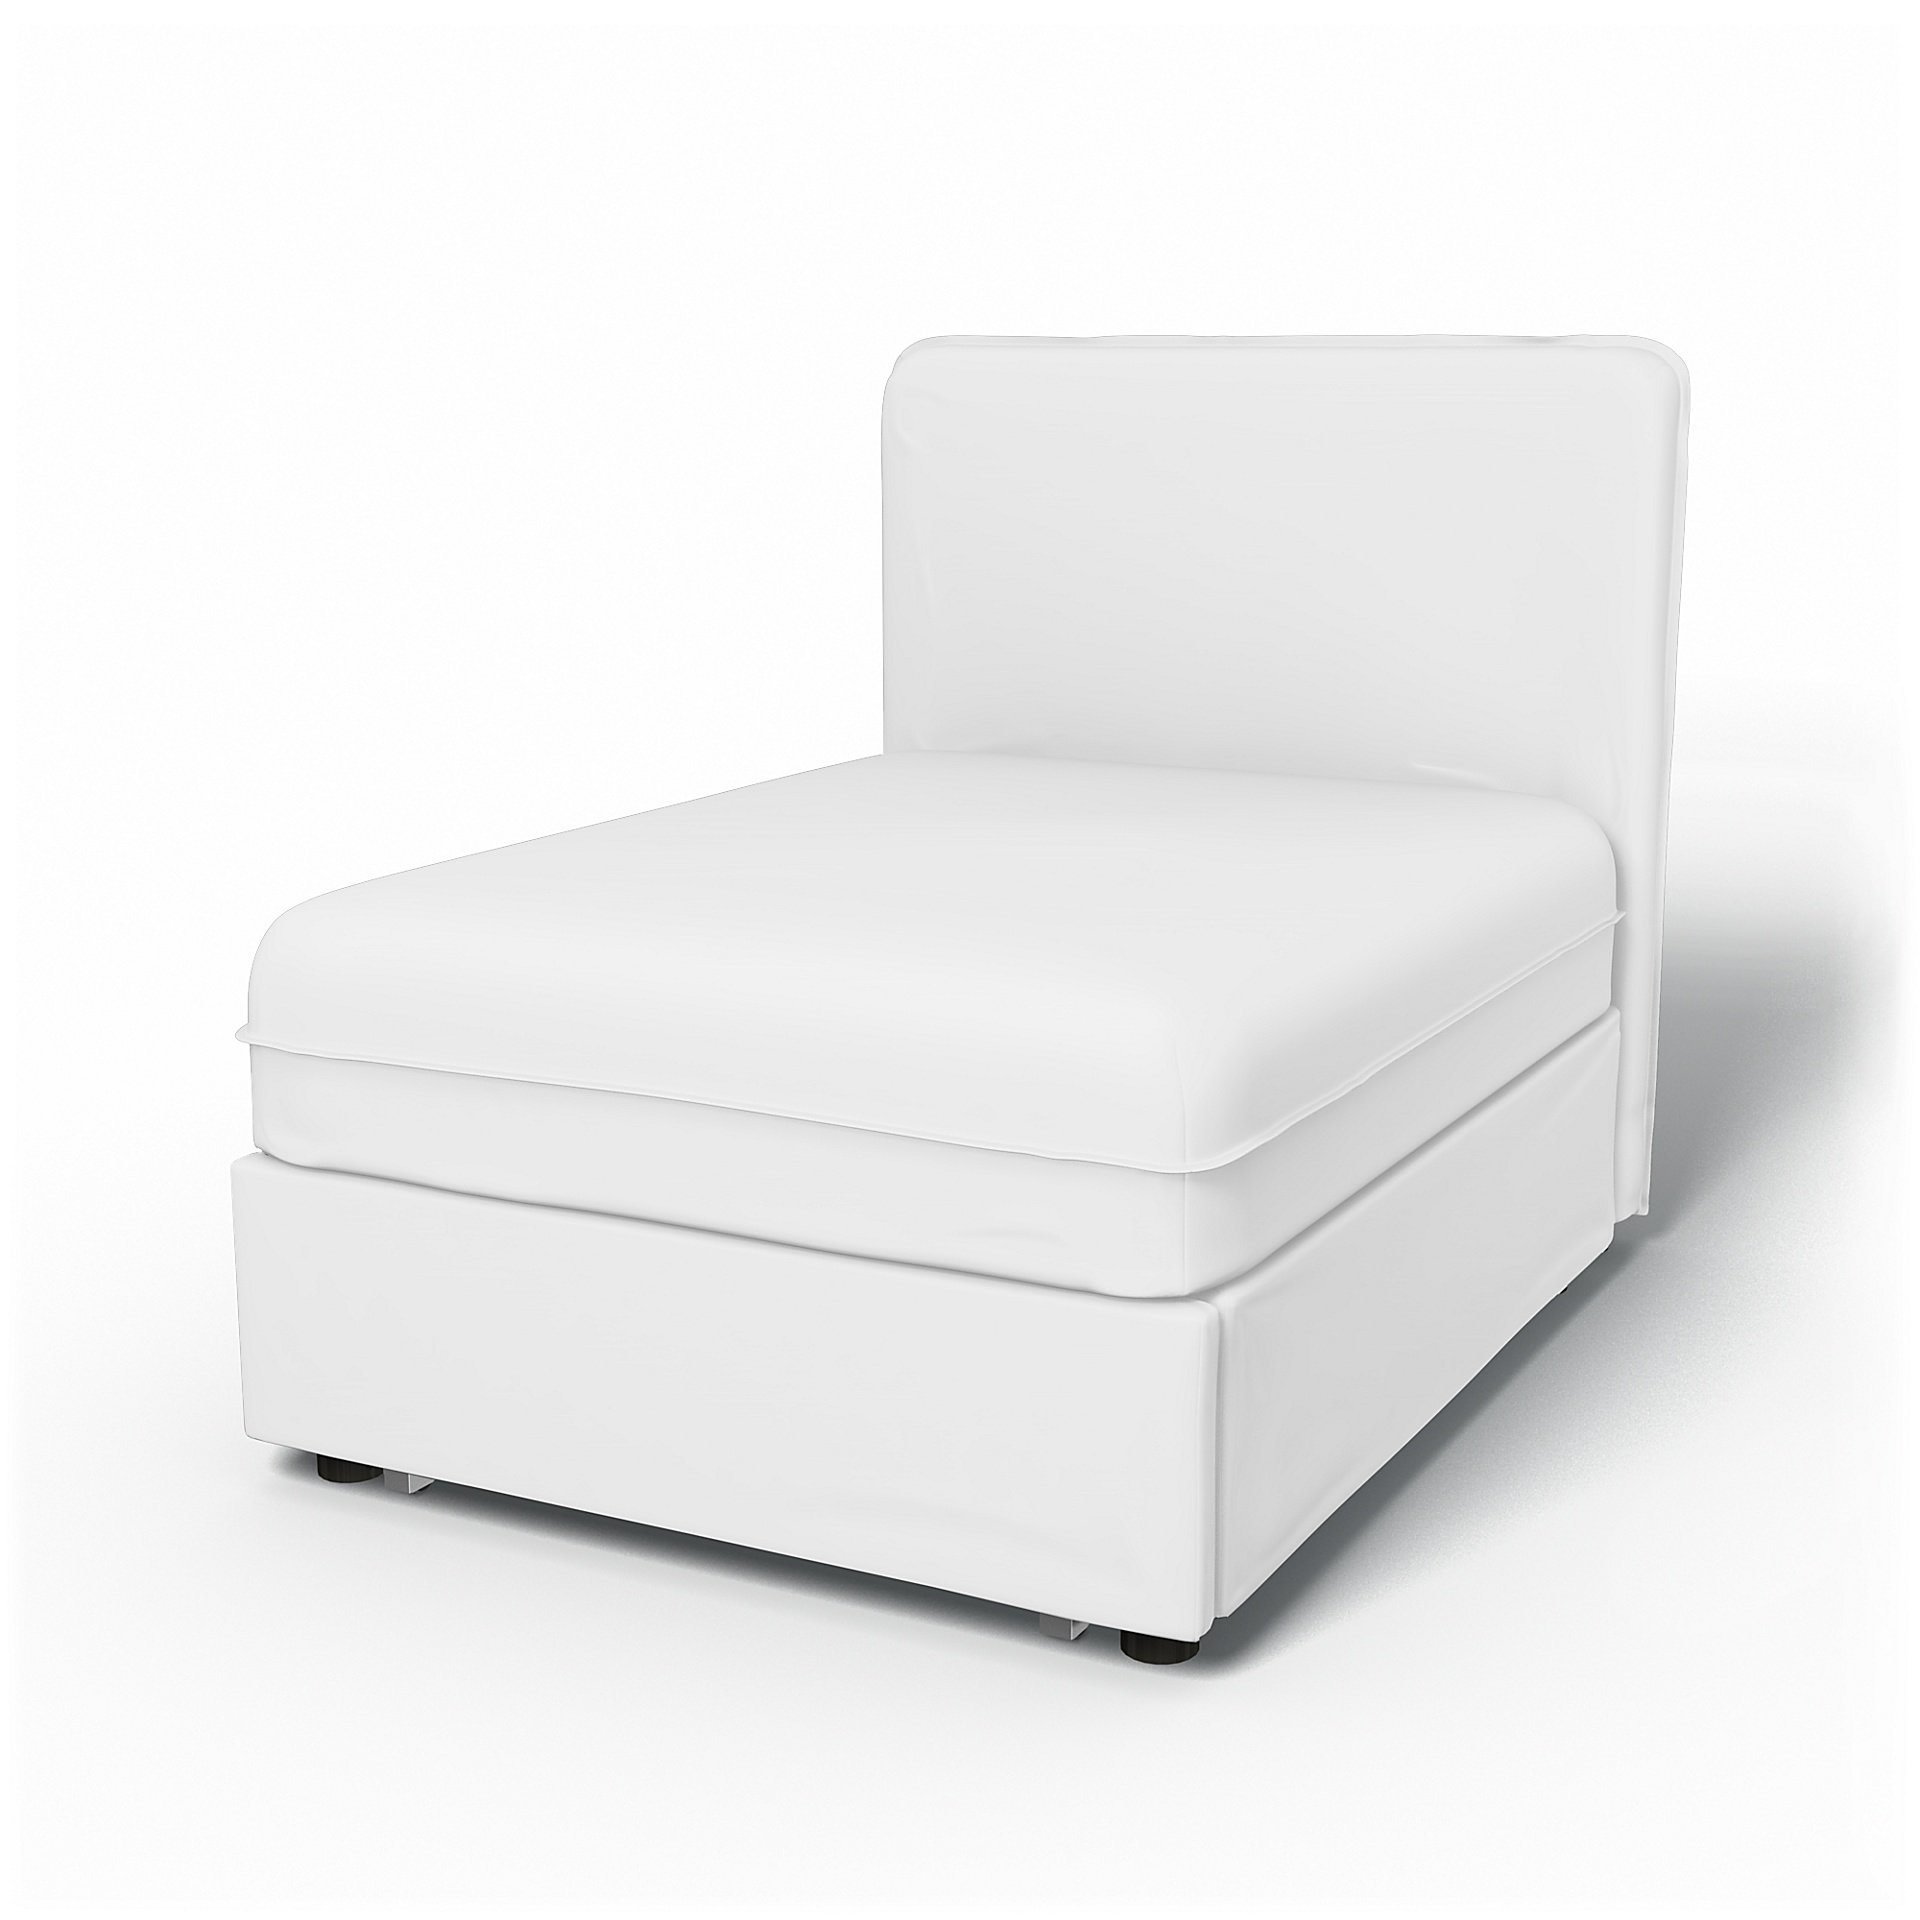 IKEA - Vallentuna Seat Module with Low Back Sofa Bed Cover 80x100 cm 32x39in, Absolute White, Linen 